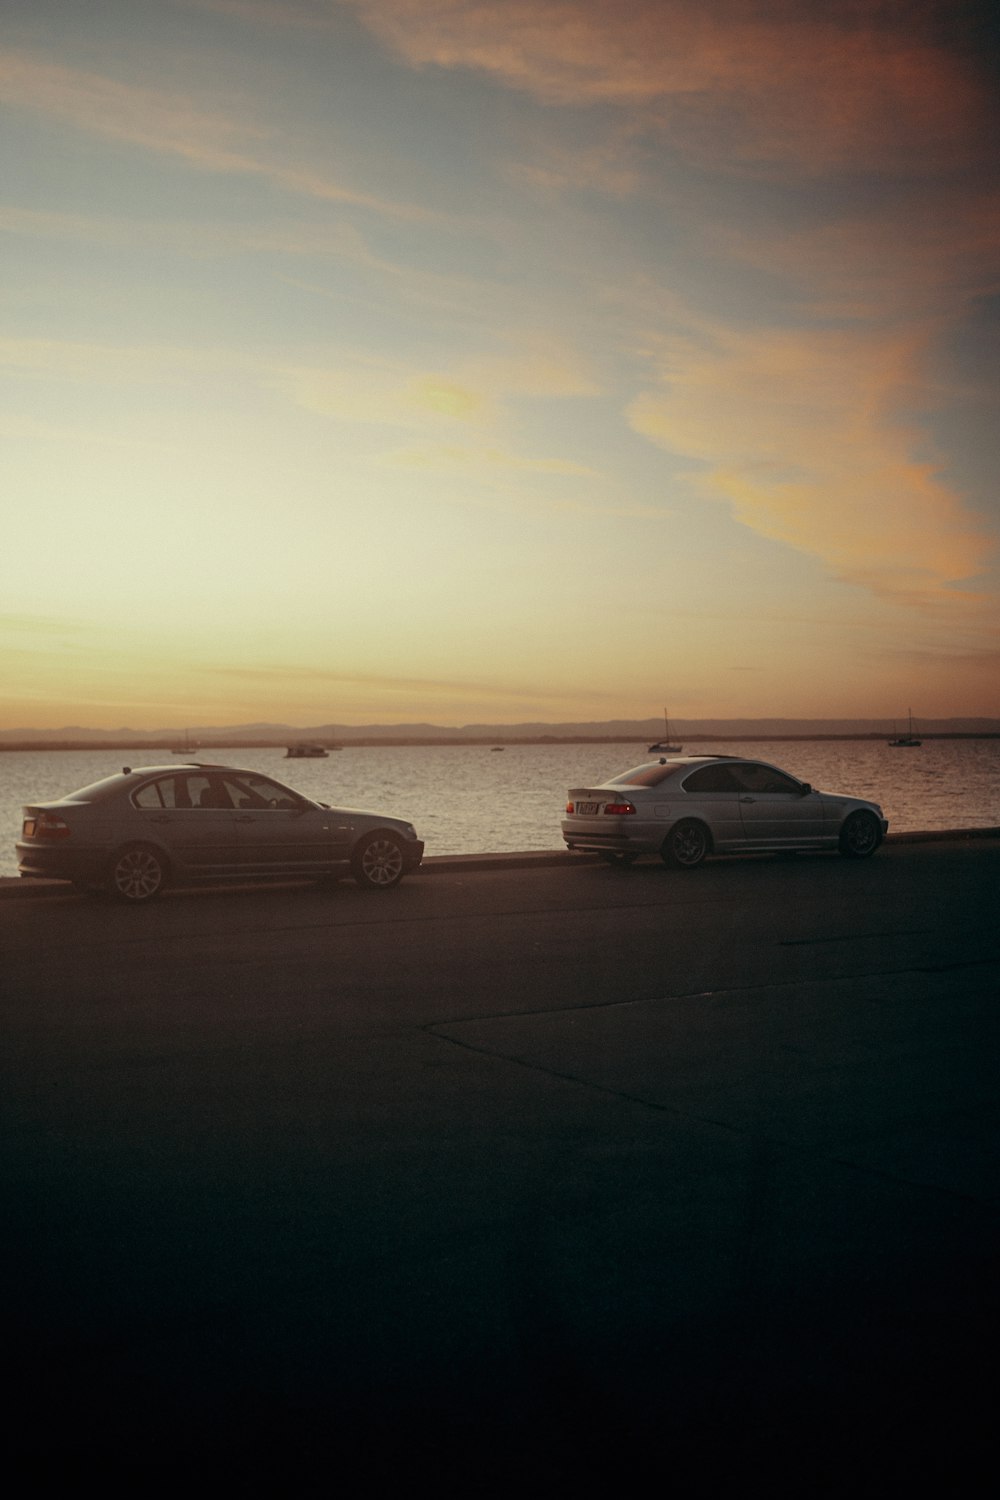 a couple of cars parked next to a body of water